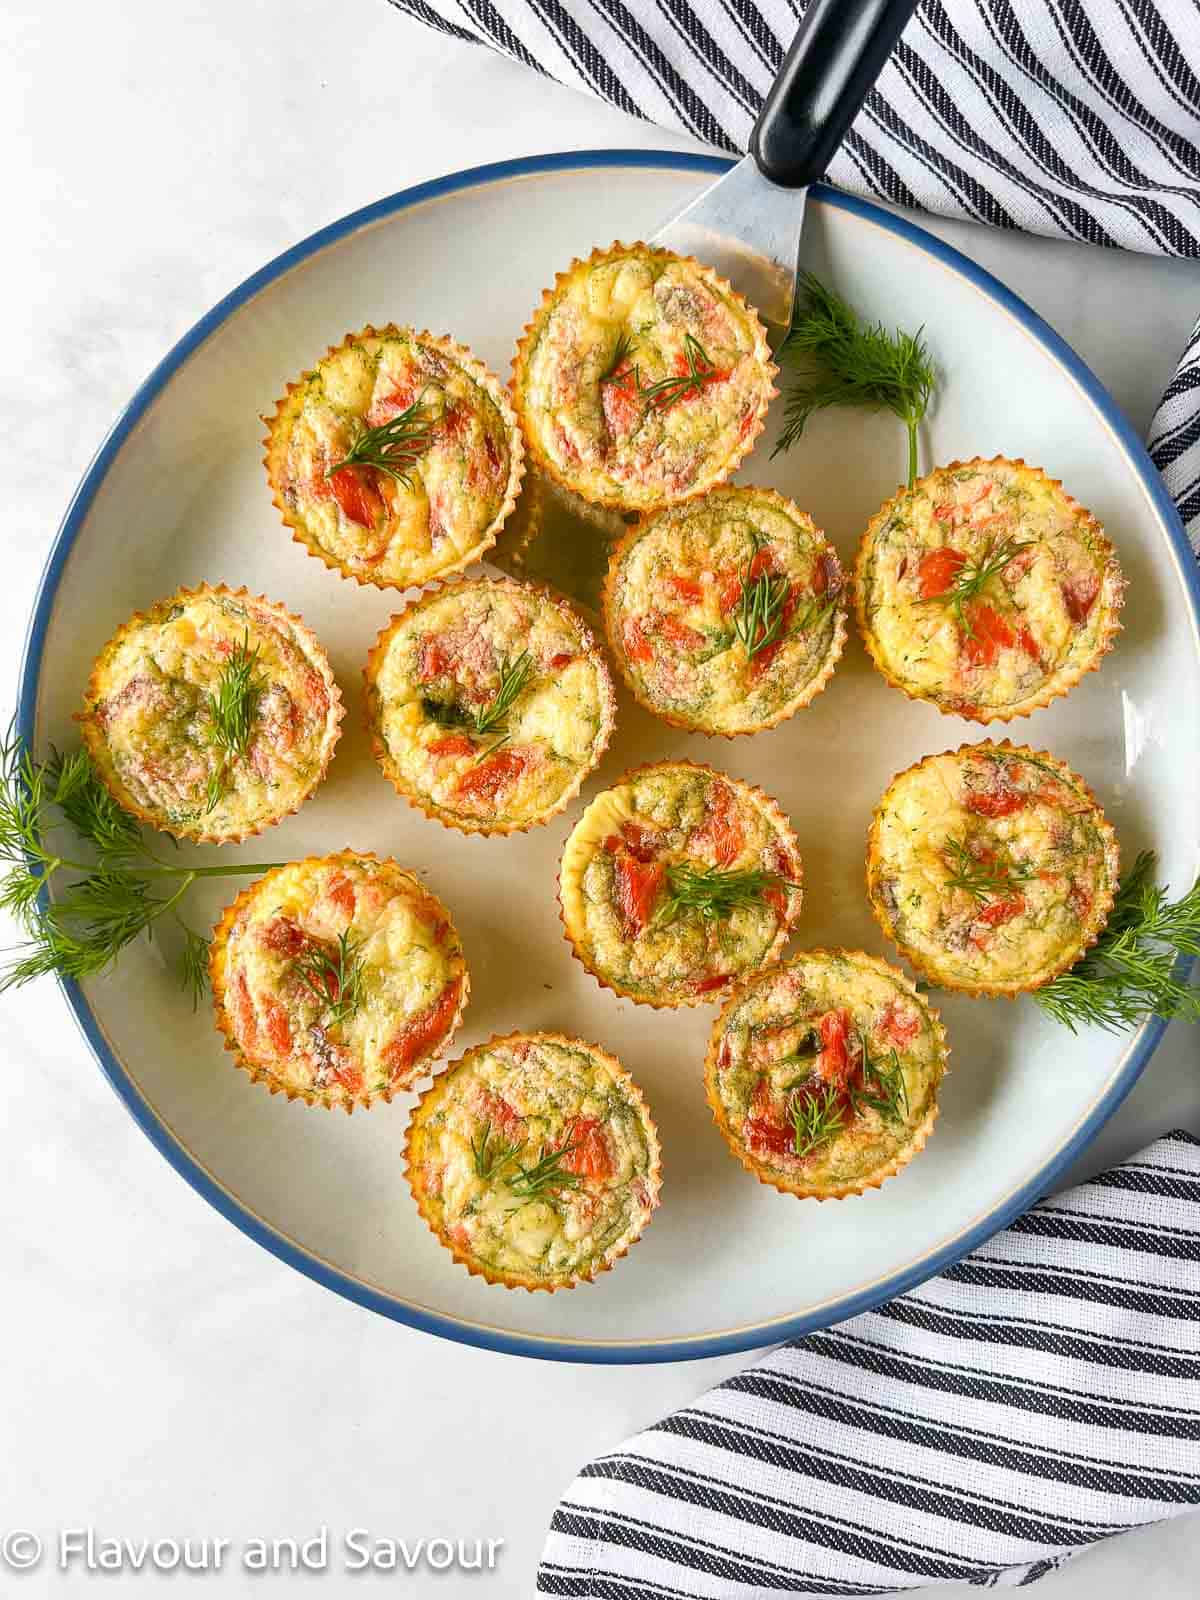 Mini crustless smoked salmon quiche arranged on a plate with a small serving lifter.